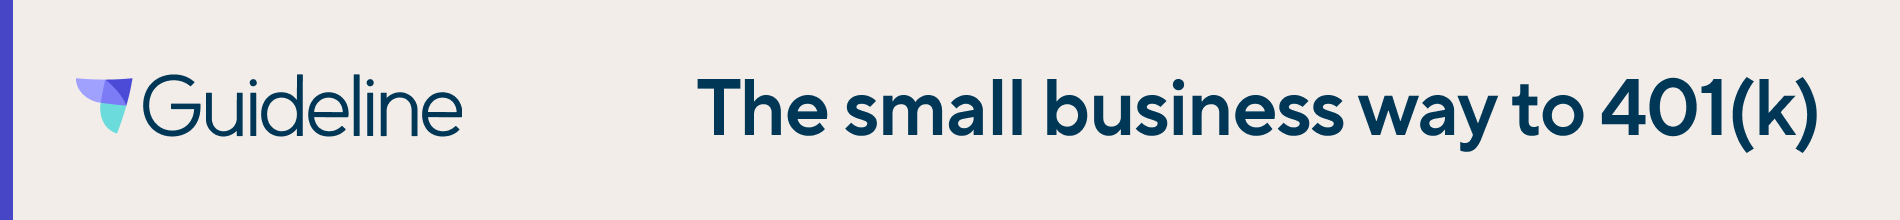 Small business 401k